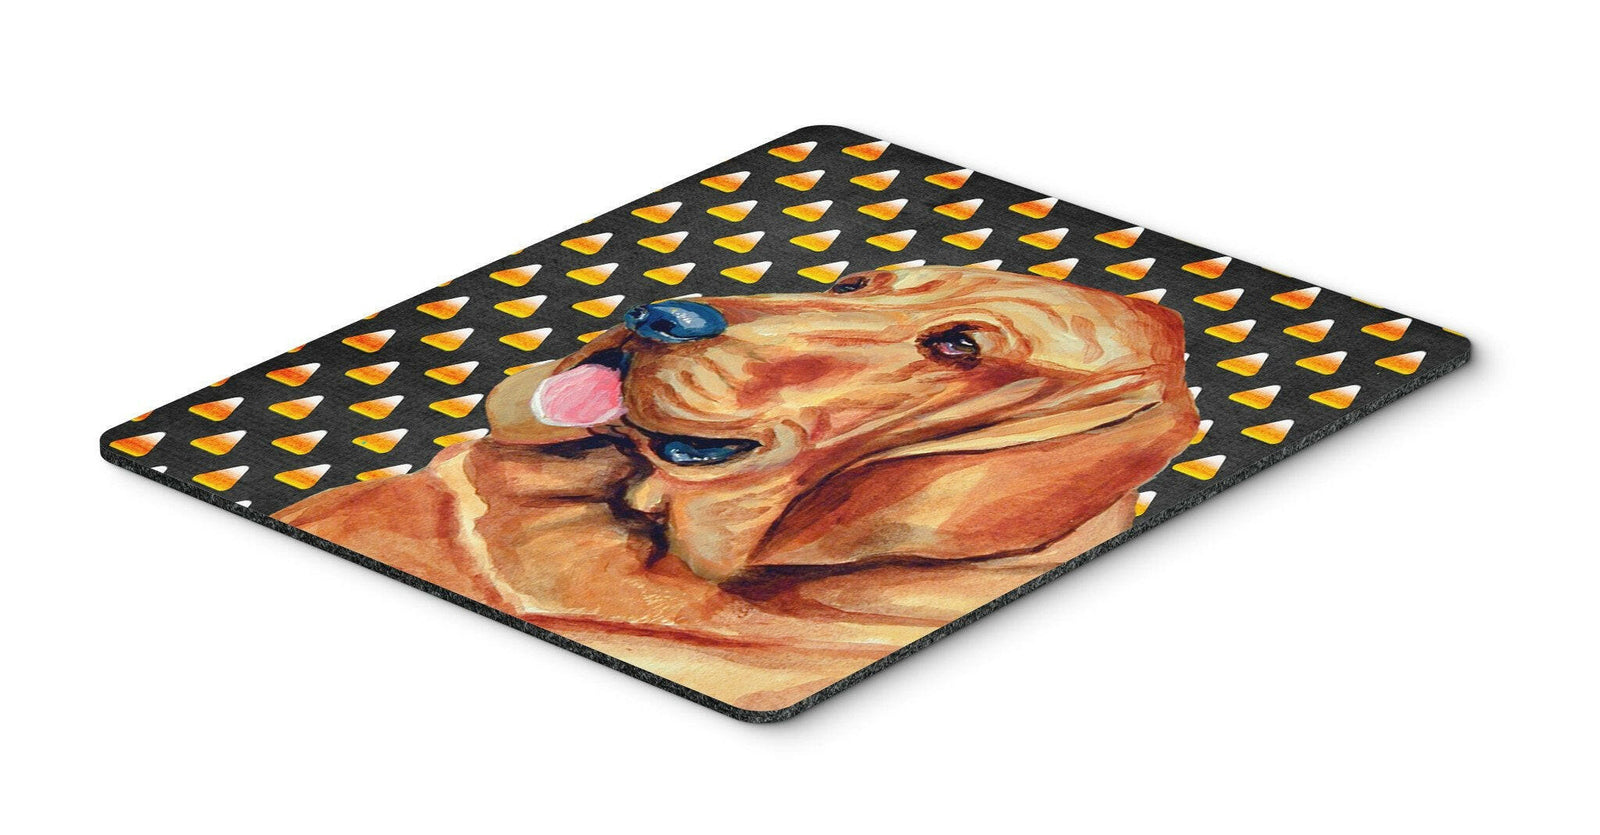 Bloodhound Candy Corn Halloween Portrait Mouse Pad, Hot Pad or Trivet by Caroline's Treasures